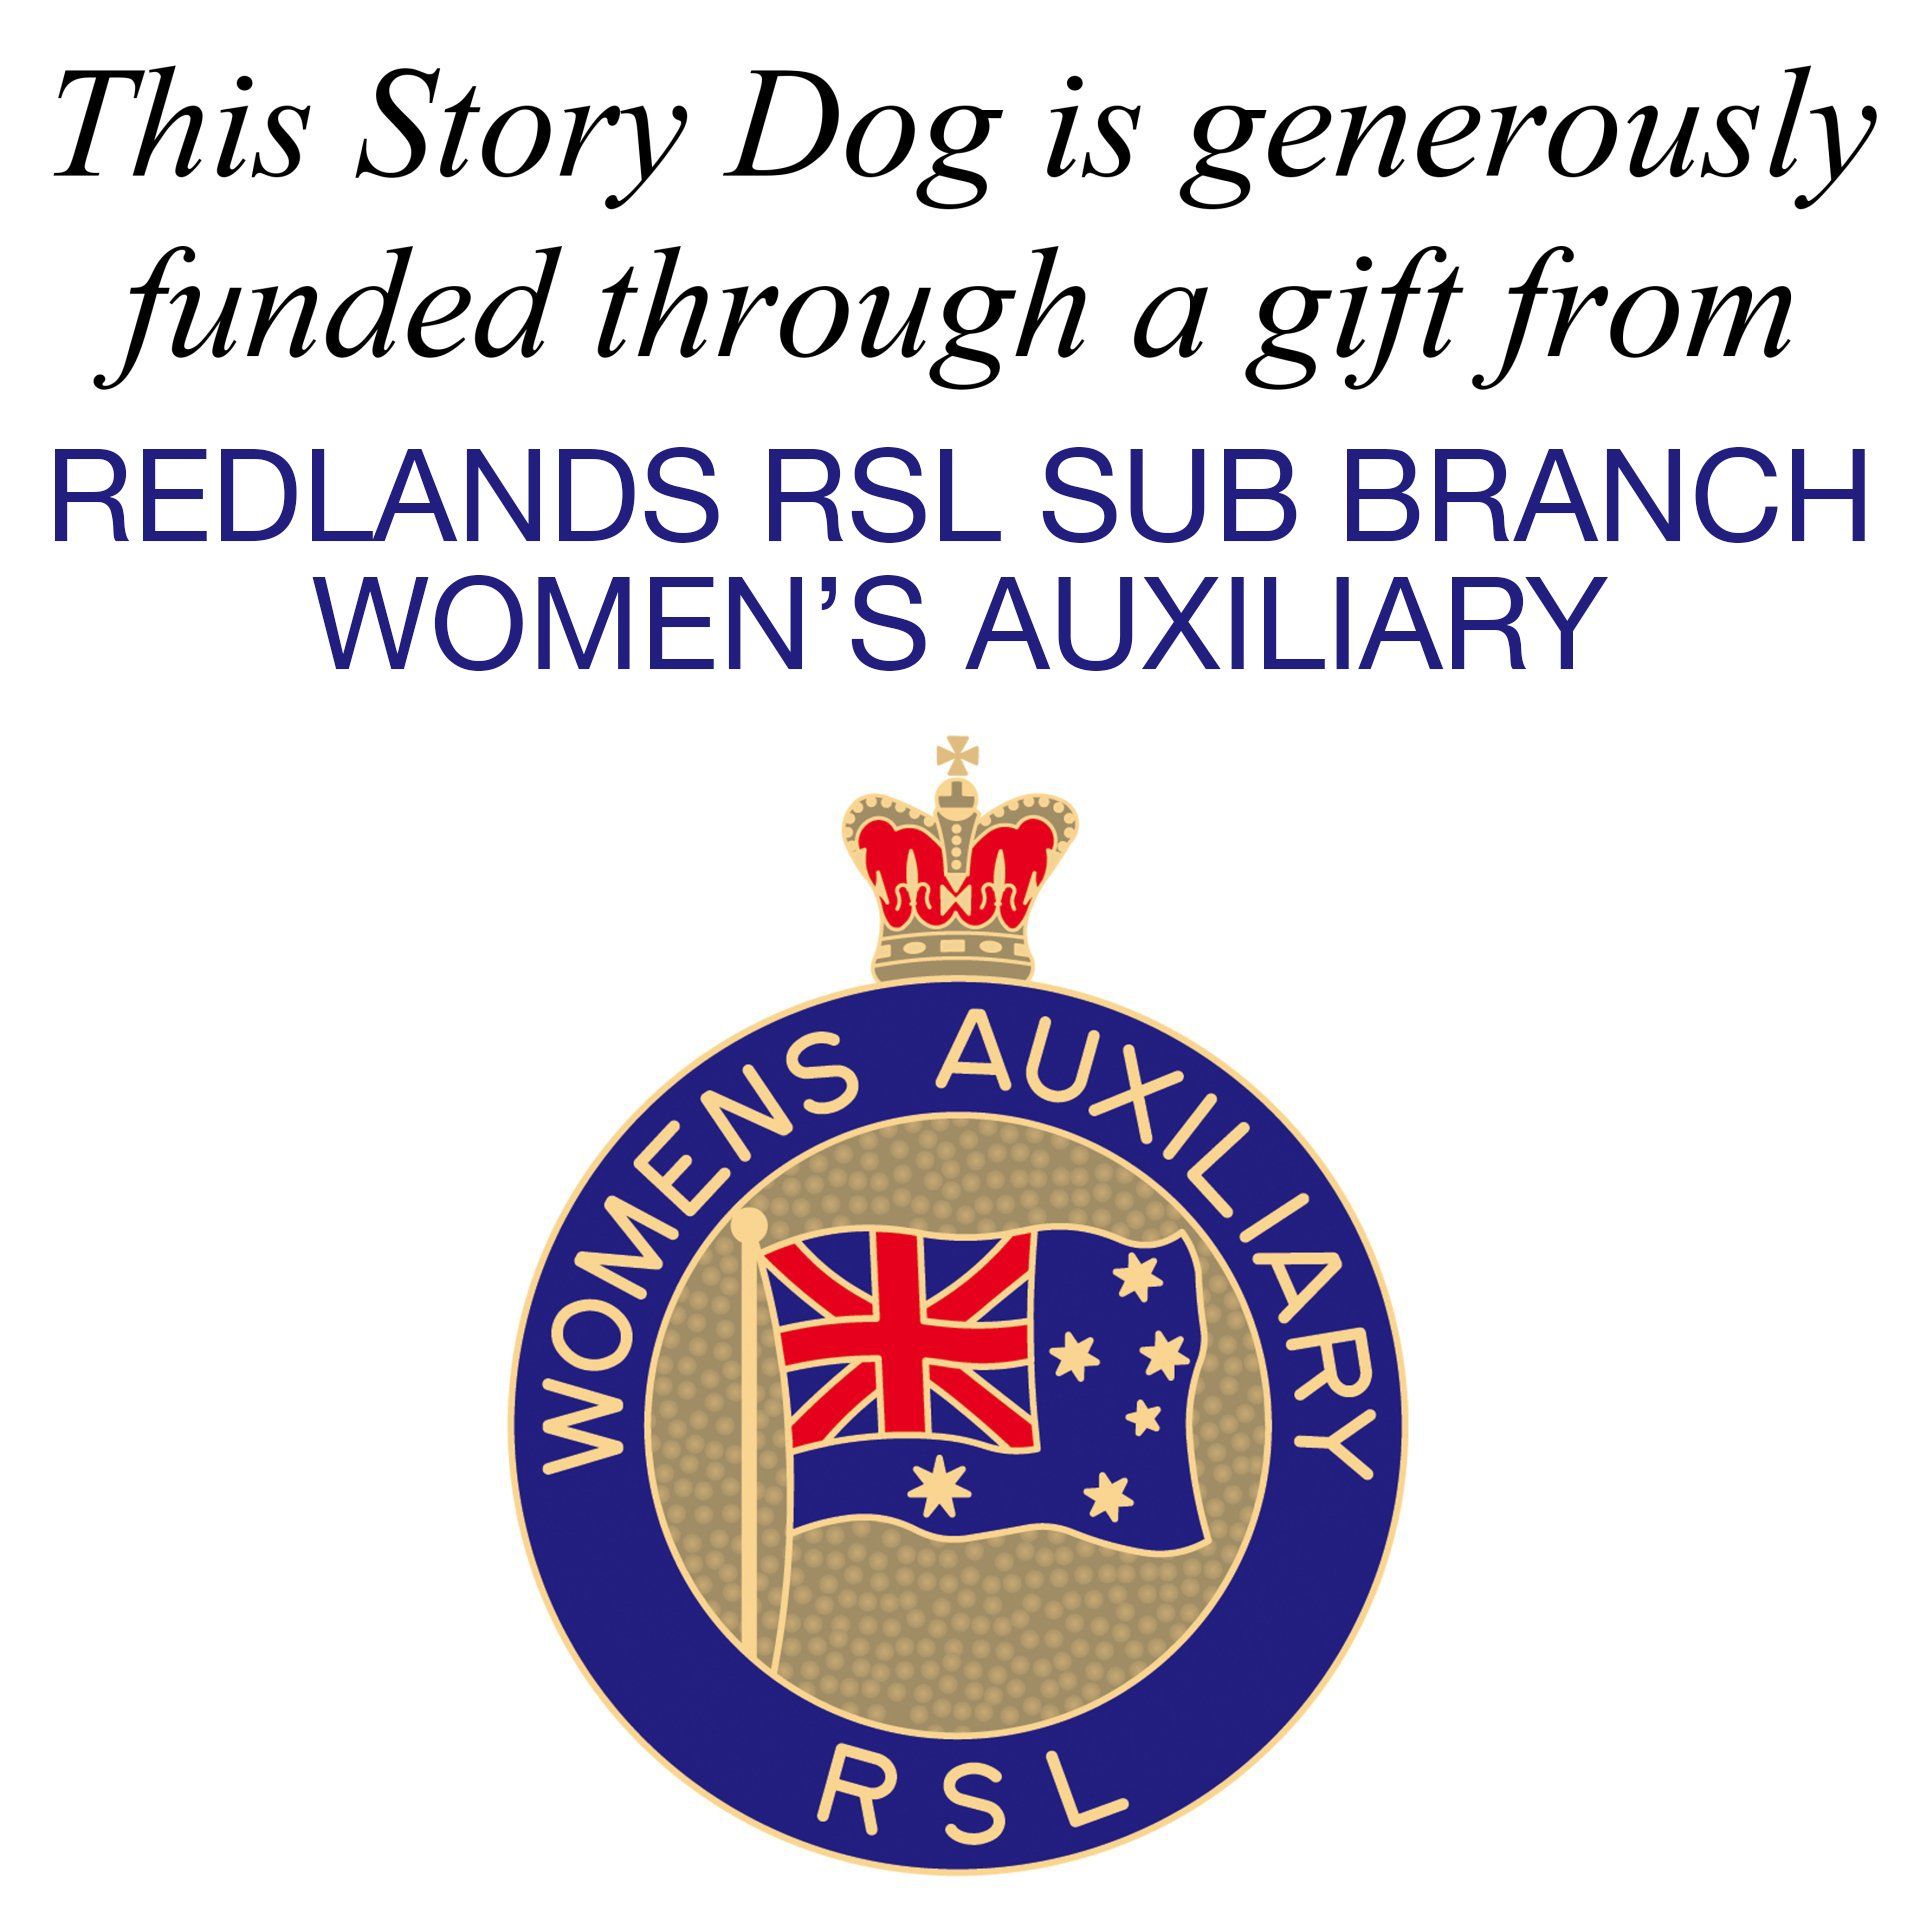 Redlands RSL Sub Branch Women's Auxiliary